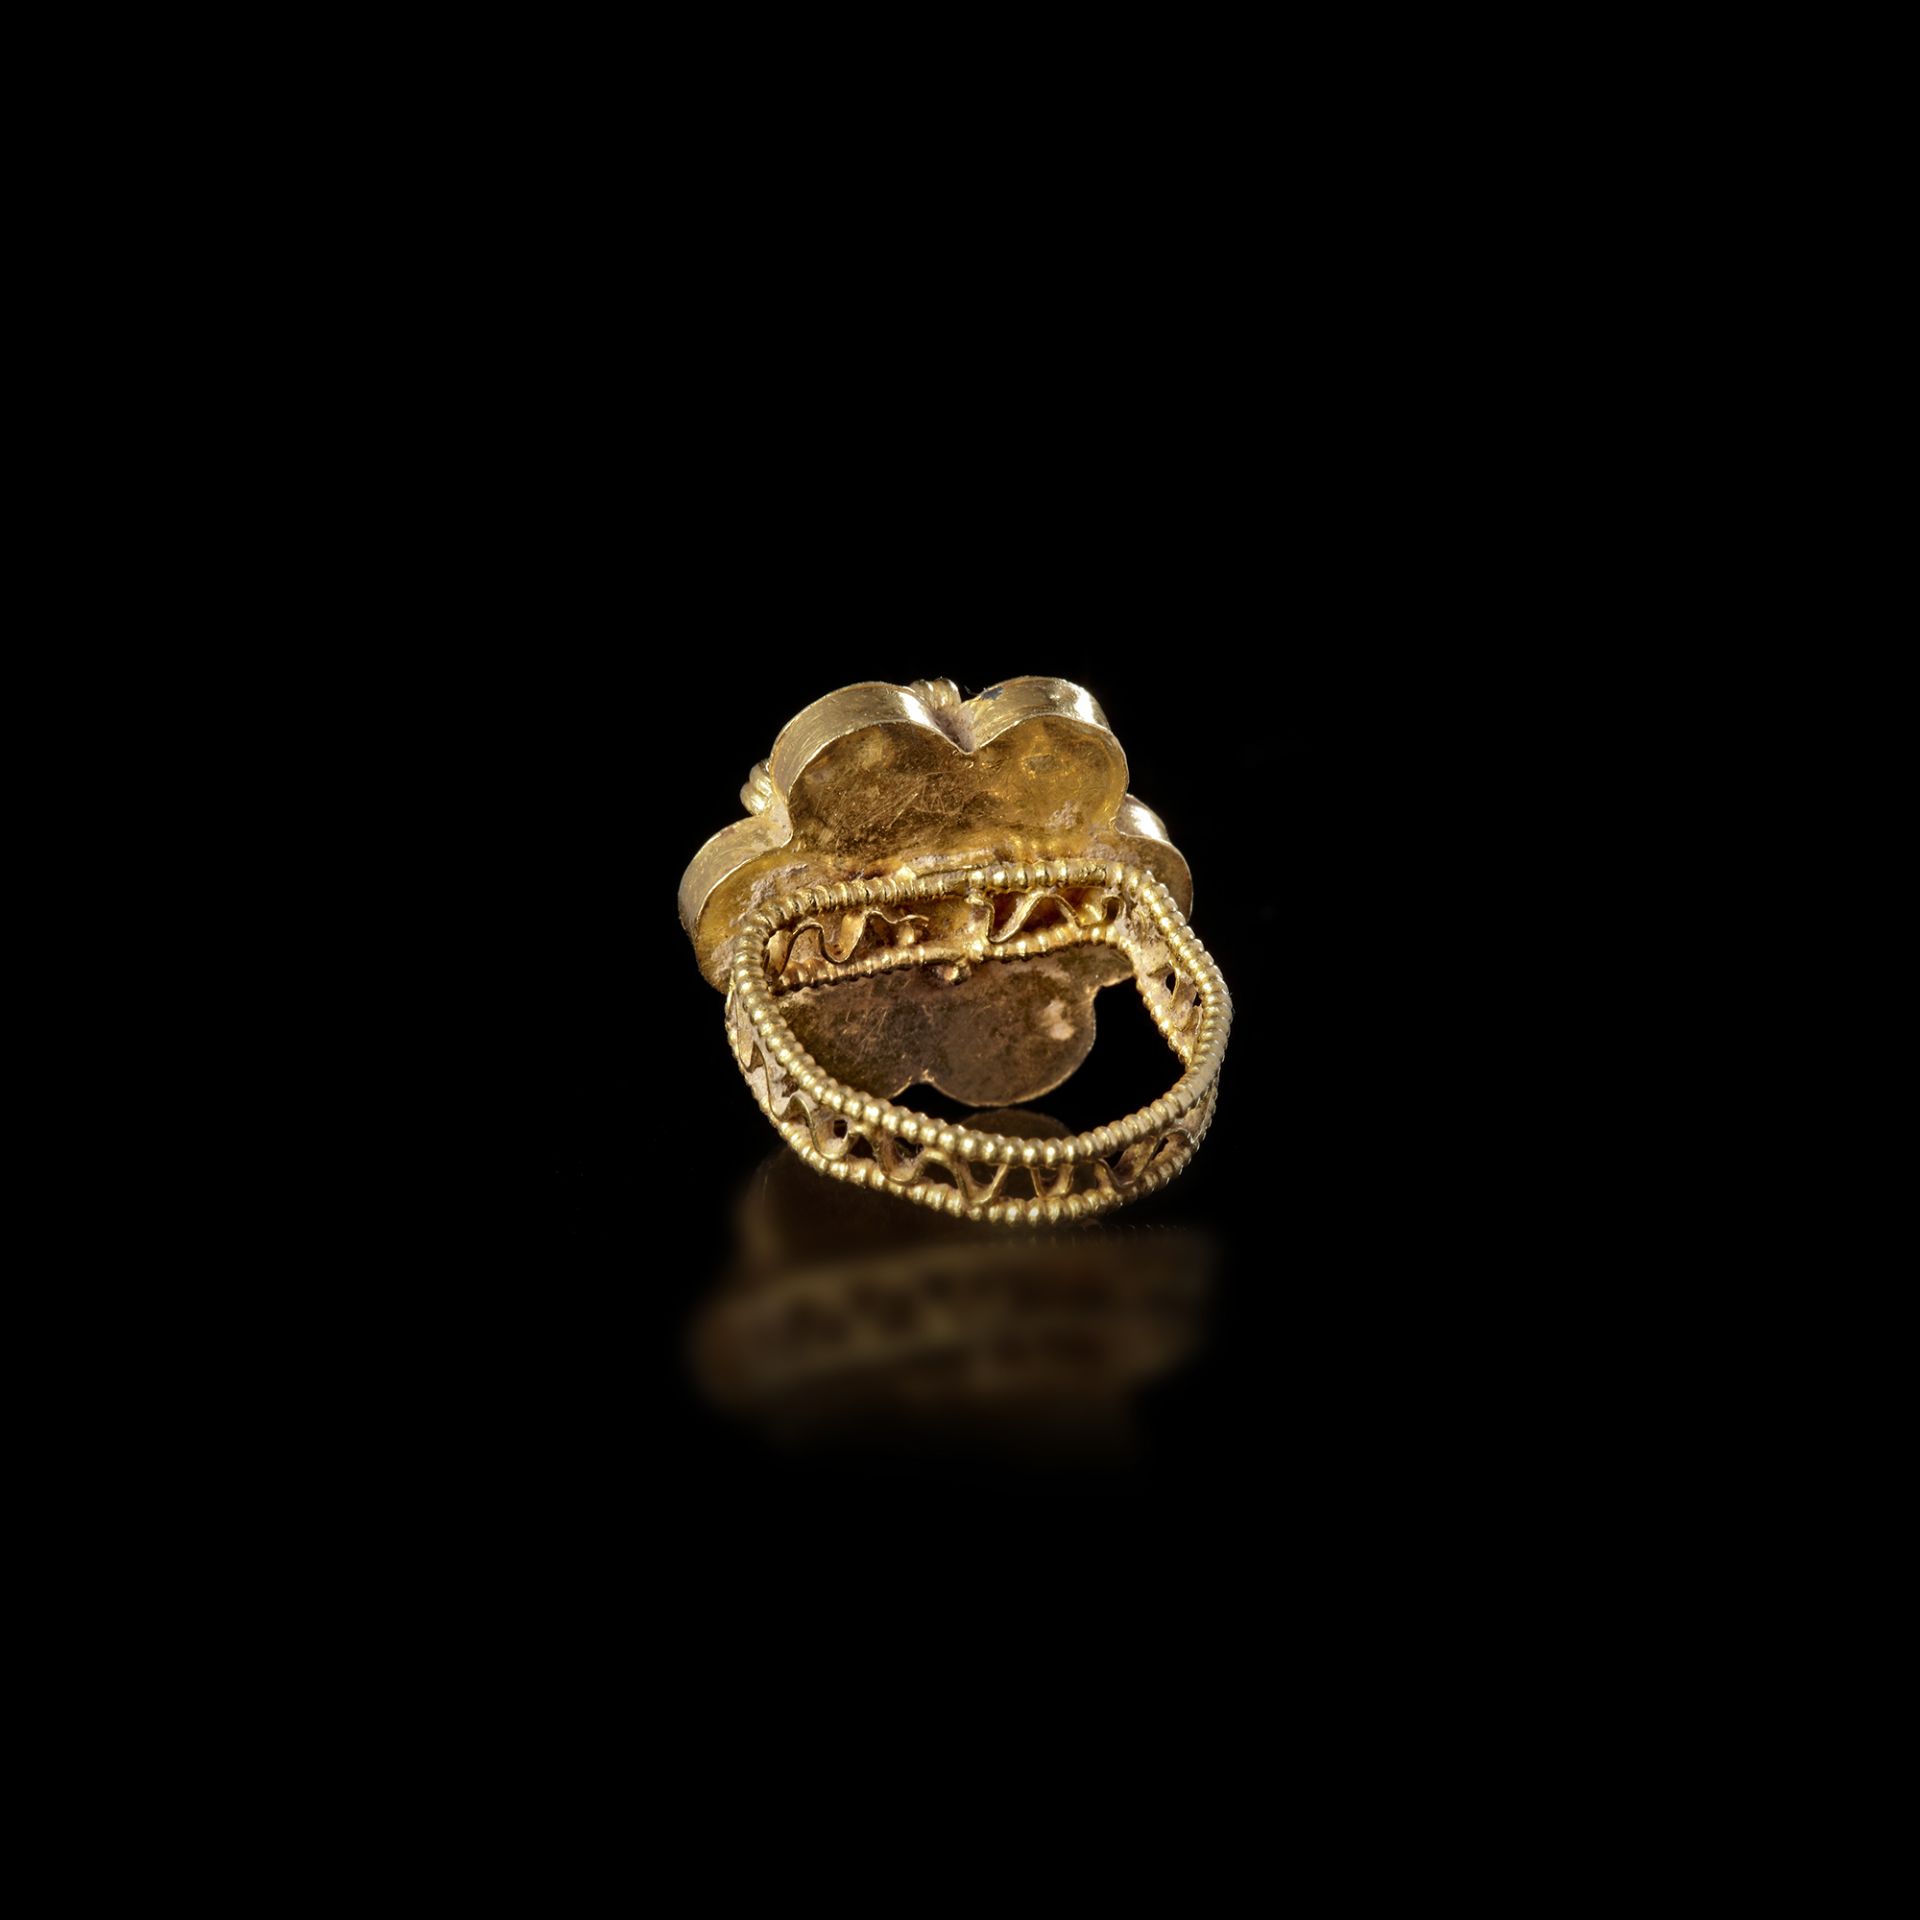 A LATE ROMAN/EARLY BYZANTINE GOLD RING WITH A GARNET, 5TH-6TH CENTURY AD - Image 2 of 4